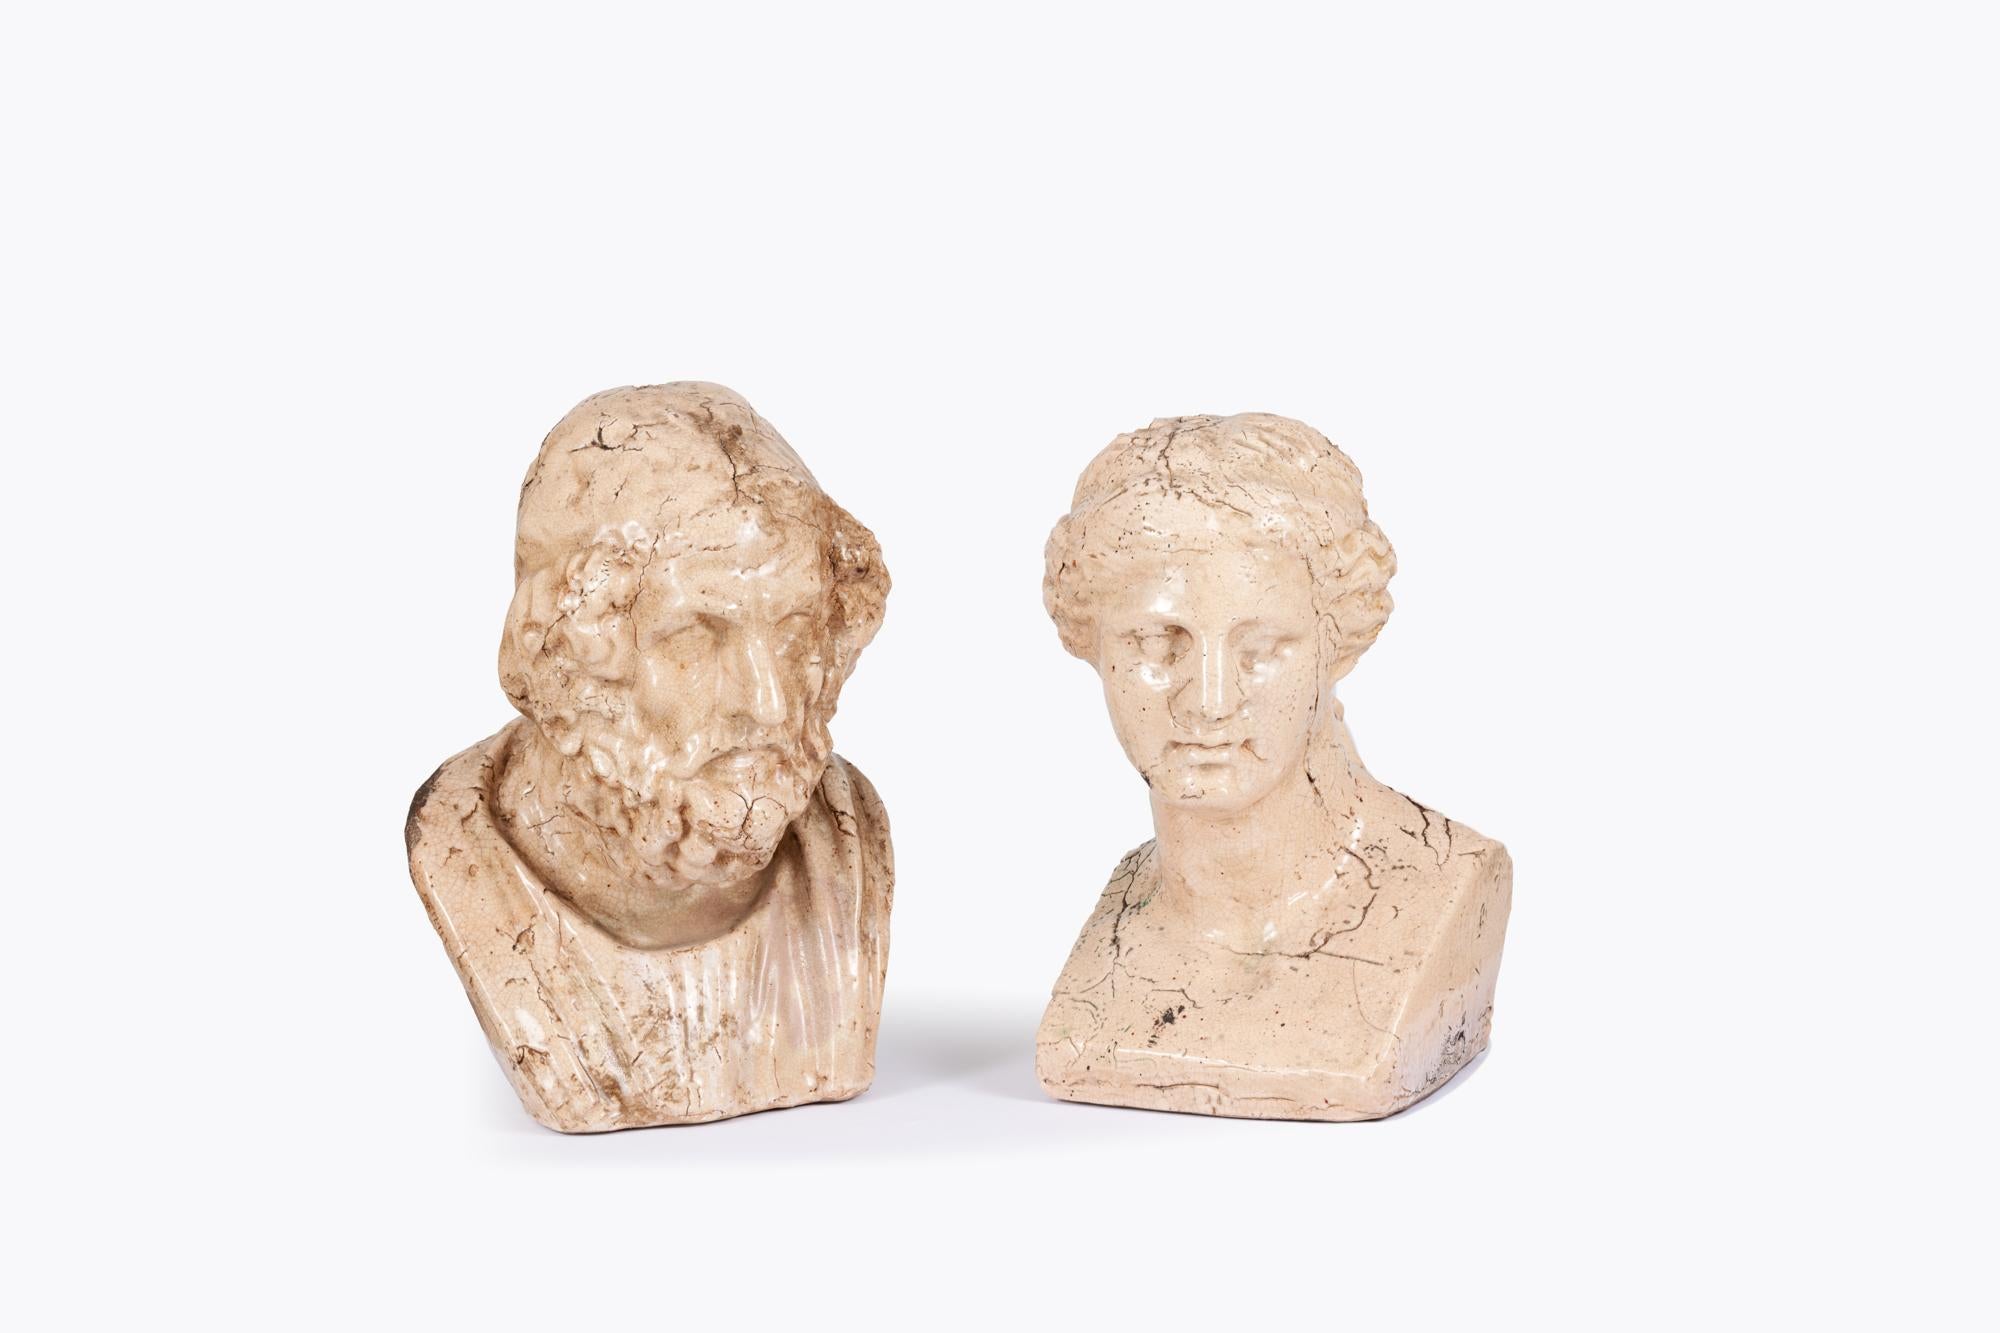 19th Century Pair Ceramic Busts depicting the Greek figures Aphrodite and Homer, both giving the illusion of aged stone.

The bust of Homer is based on a much-restored Roman copy of a Hellenistic original. It depicts the poet as a mature bearded